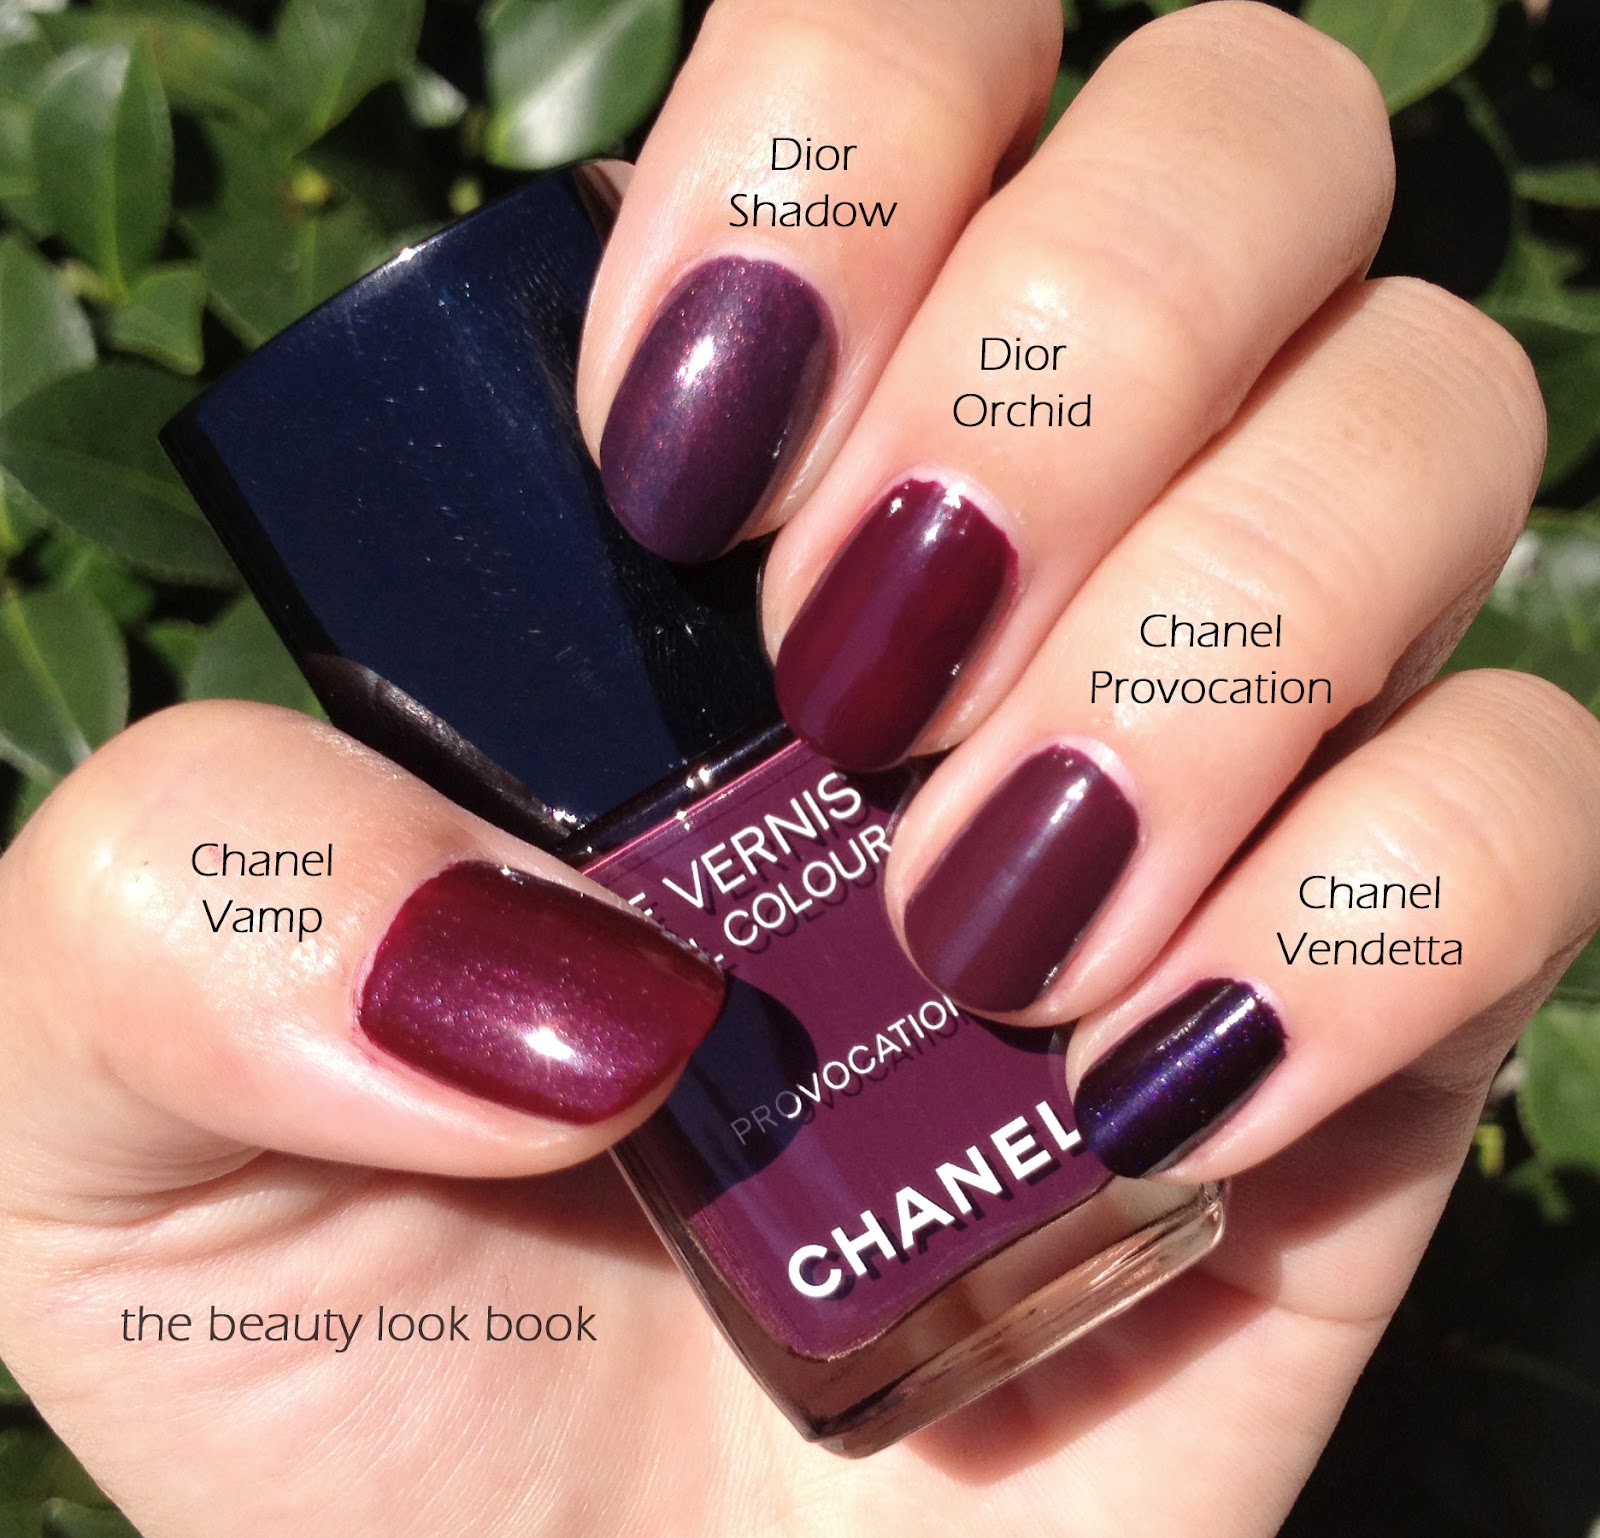 Chanel Provocation Le Vernis - The Beauty Look Book